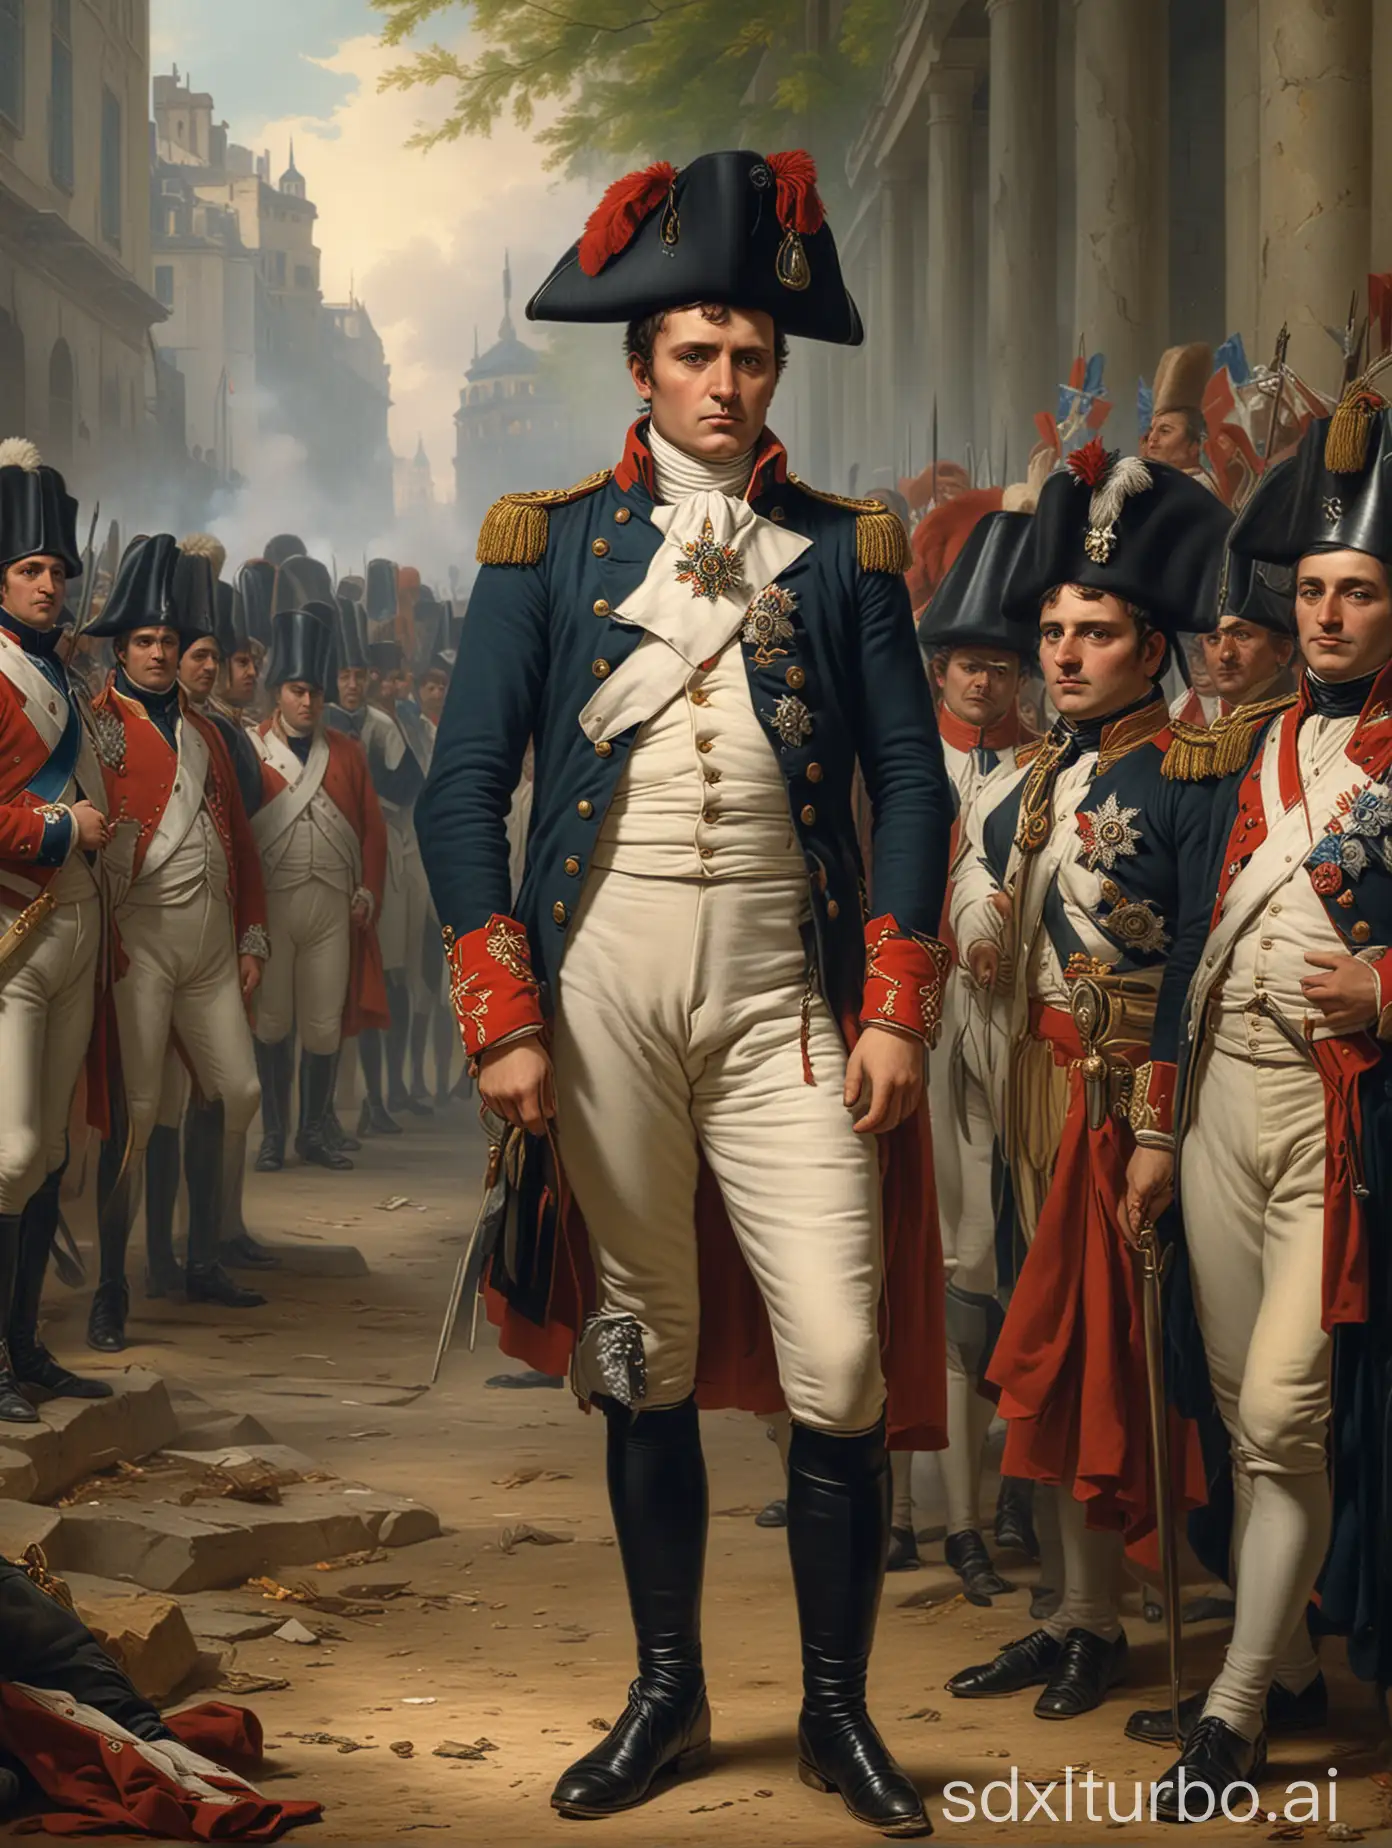 Napoleon Bonaparte standing confidently among a crowd, symbolizing his rise to power